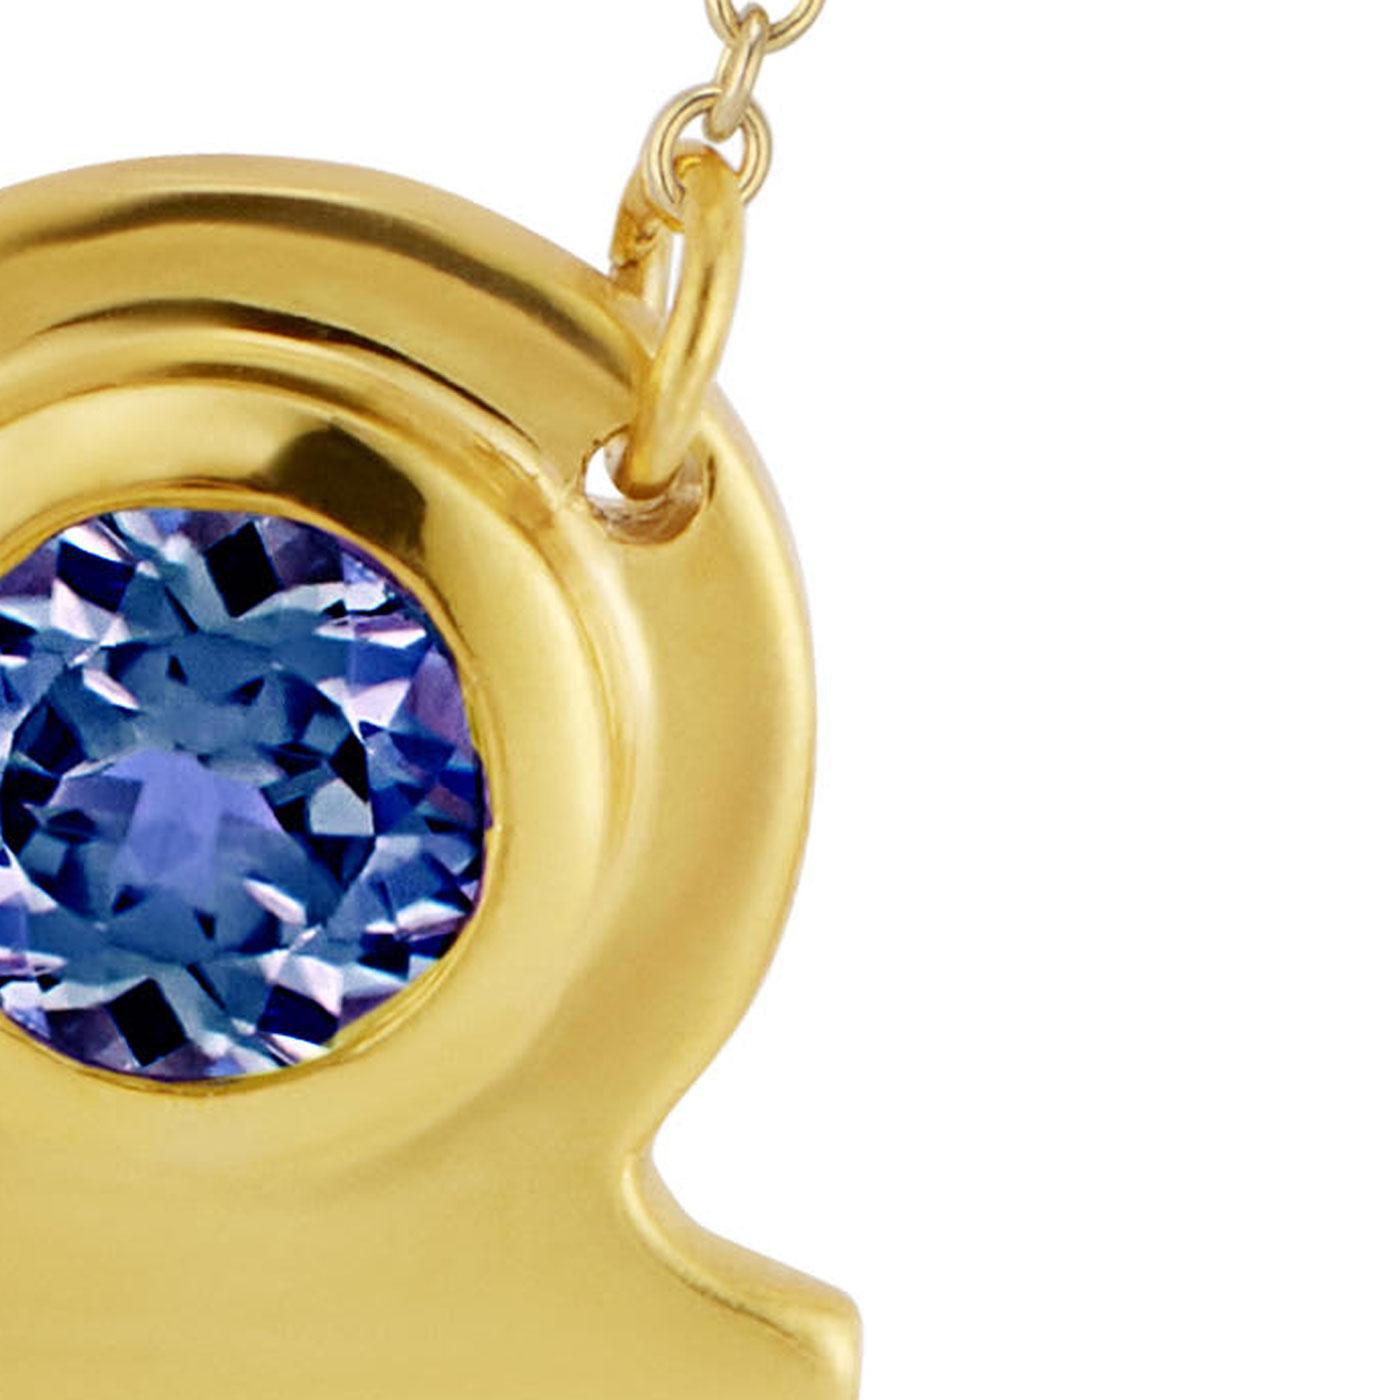 22KT Gold Vermeil Crescent Iolite Solitaire Necklace by Chee Lee Designs

This 16-inch necklace is 22 Karat Yellow Gold Vermeil with an Iolite Solitaire Stone.

We also offer this in 15.5 inches upon request.  Please message the storefront for this